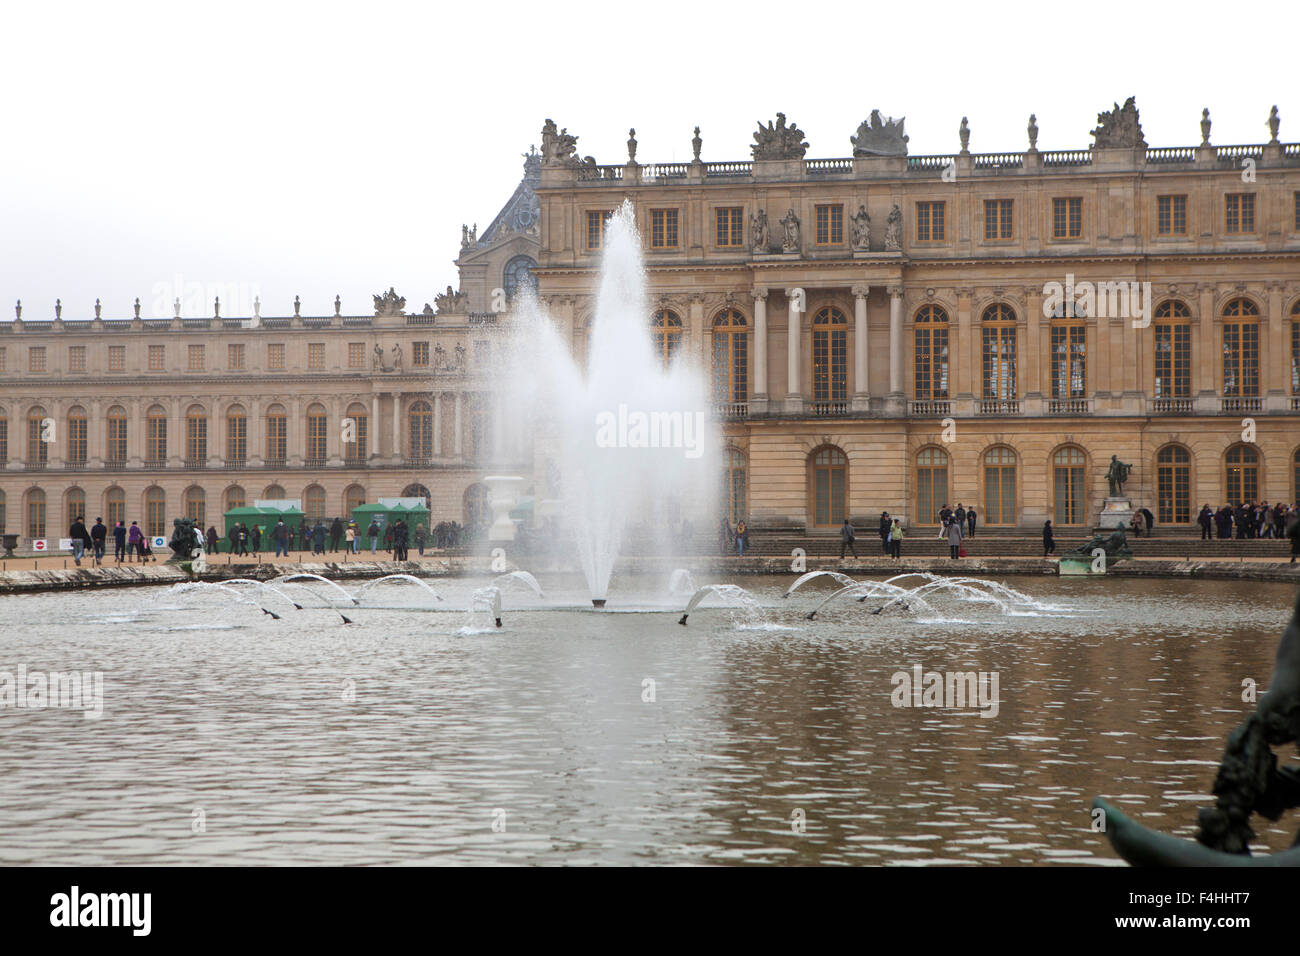 The Palace of Versailles a royal château in Versailles in the Île-de-France region of France a suburb of Paris Stock Photo